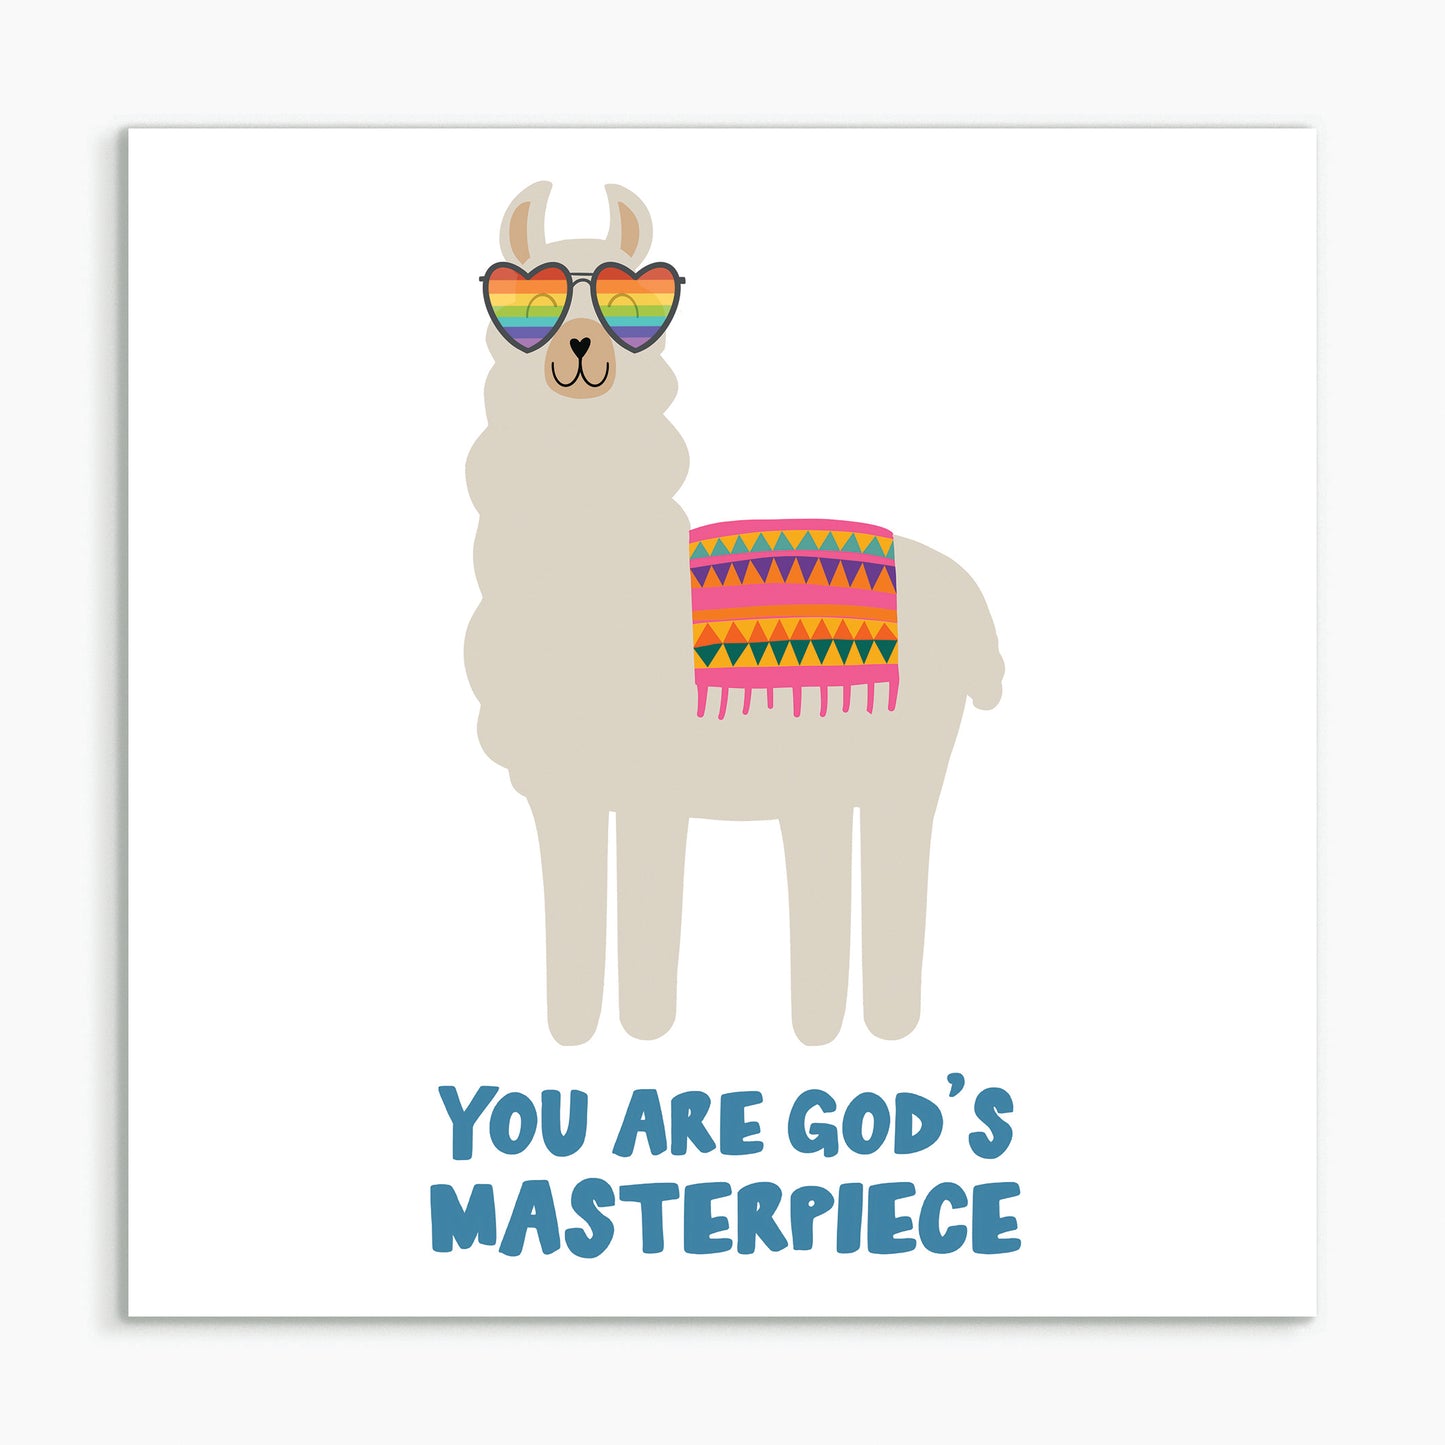 "You are God's masterpiece - Llama" White framed print